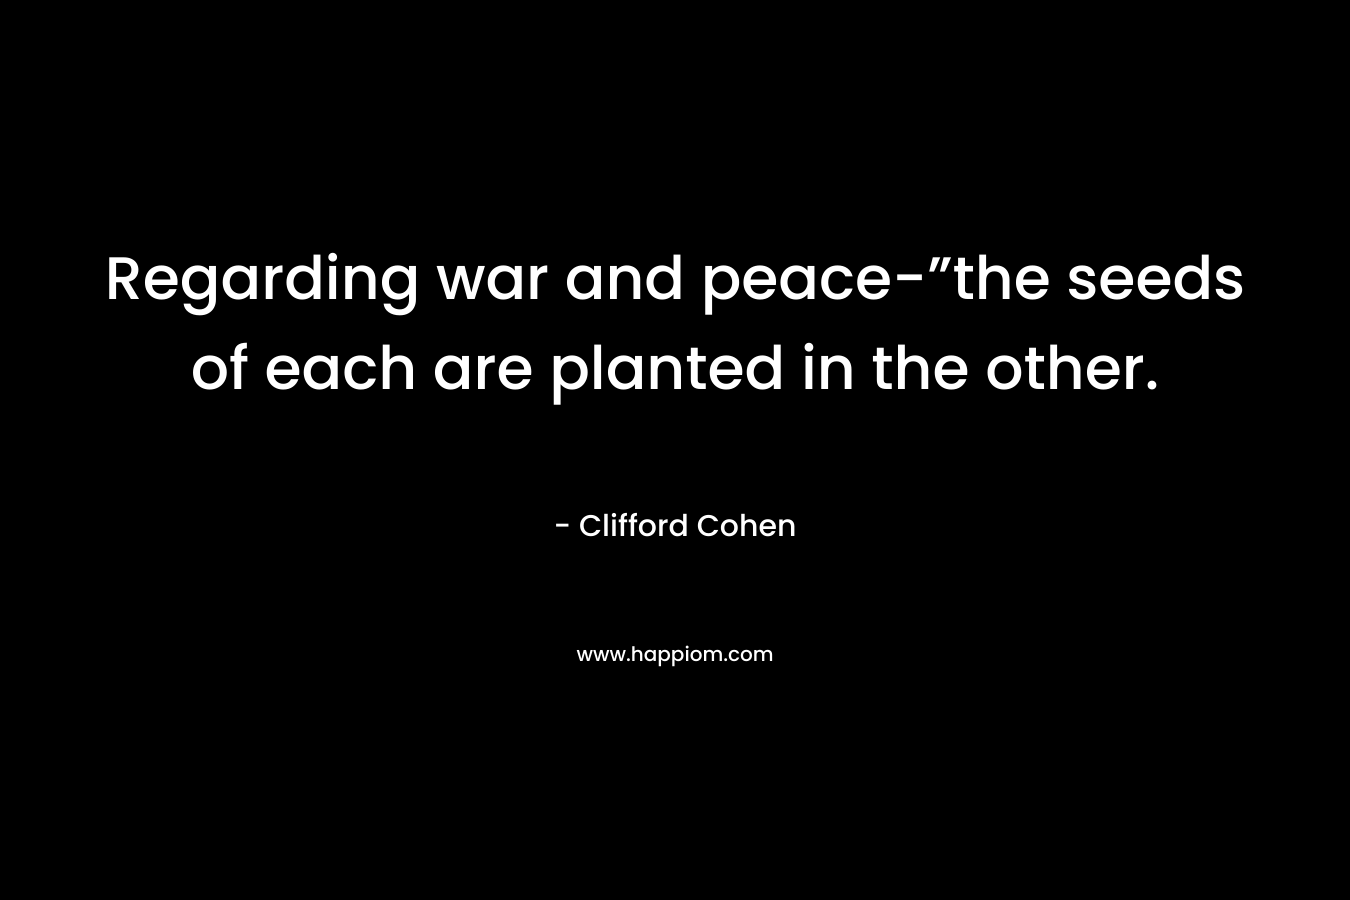 Regarding war and peace-”the seeds of each are planted in the other.